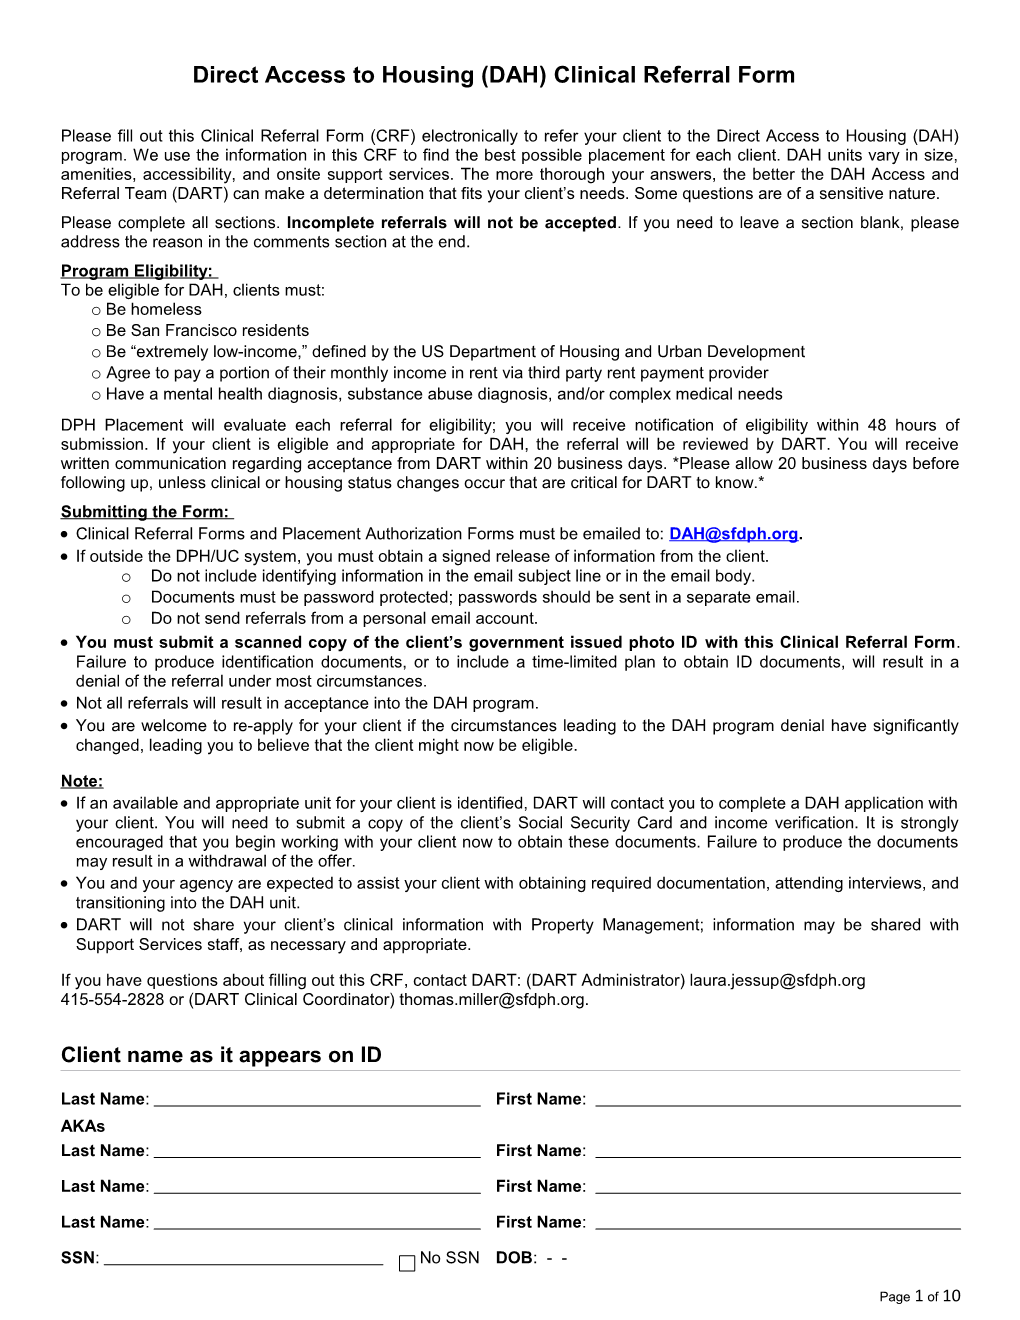 Direct Access to Housing (DAH) Clinical Referral Form